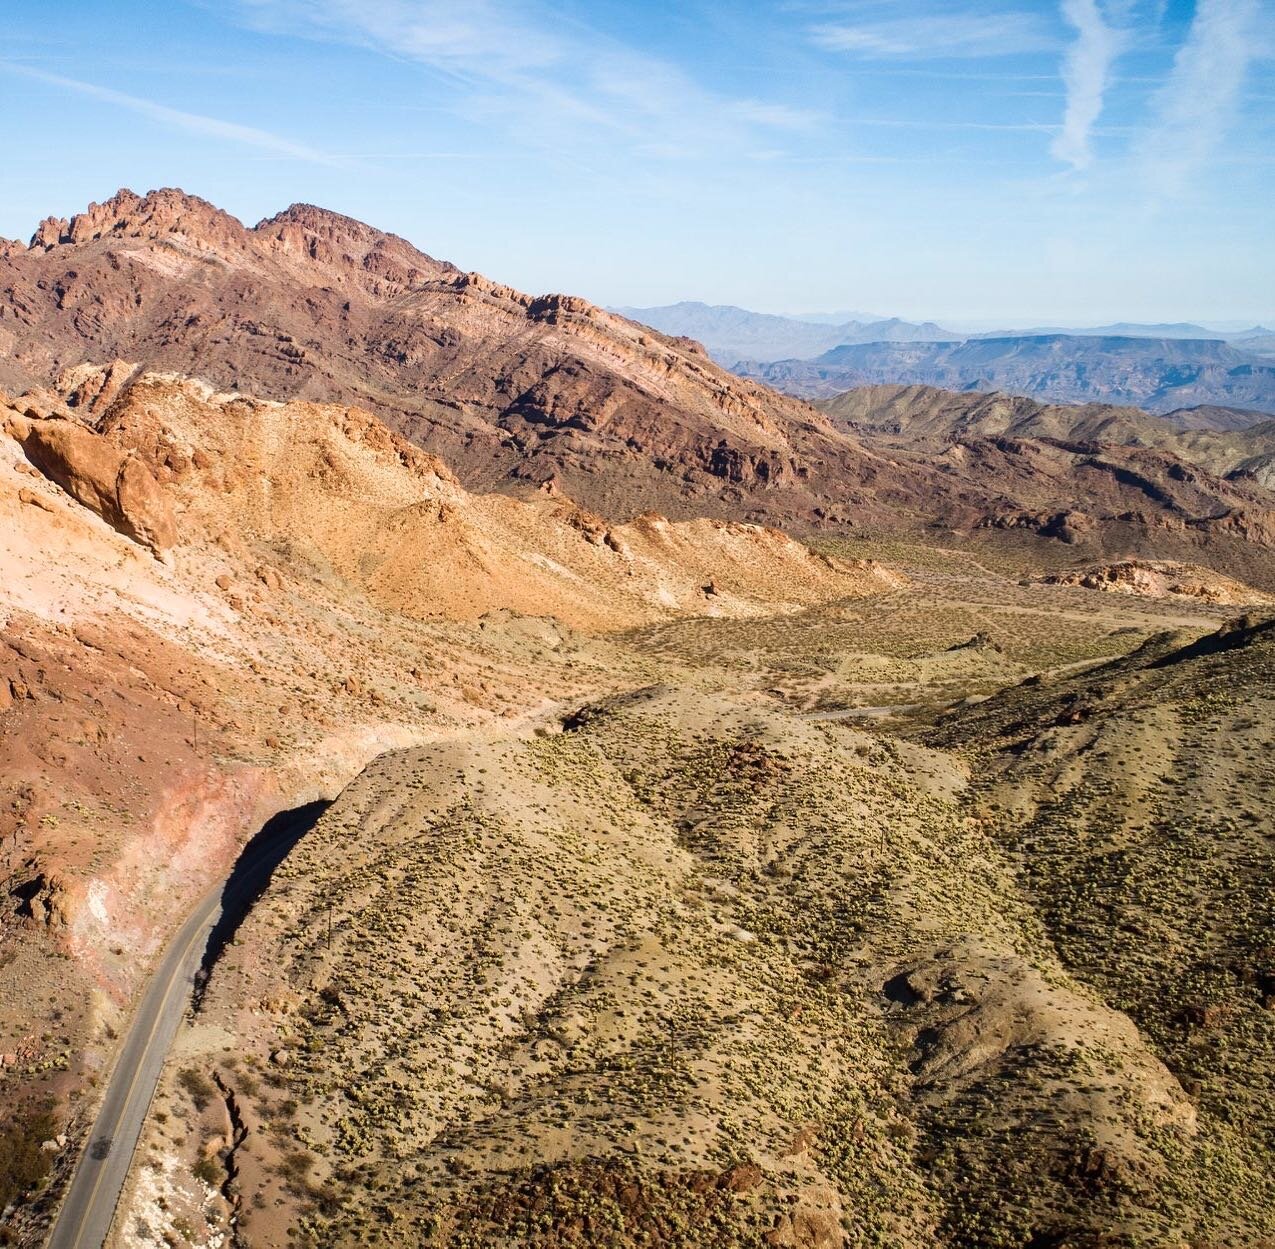 You never know what&rsquo;s around the next bend #AmericanWest #nevada #nevadadesert #LasVegas #dronephotography